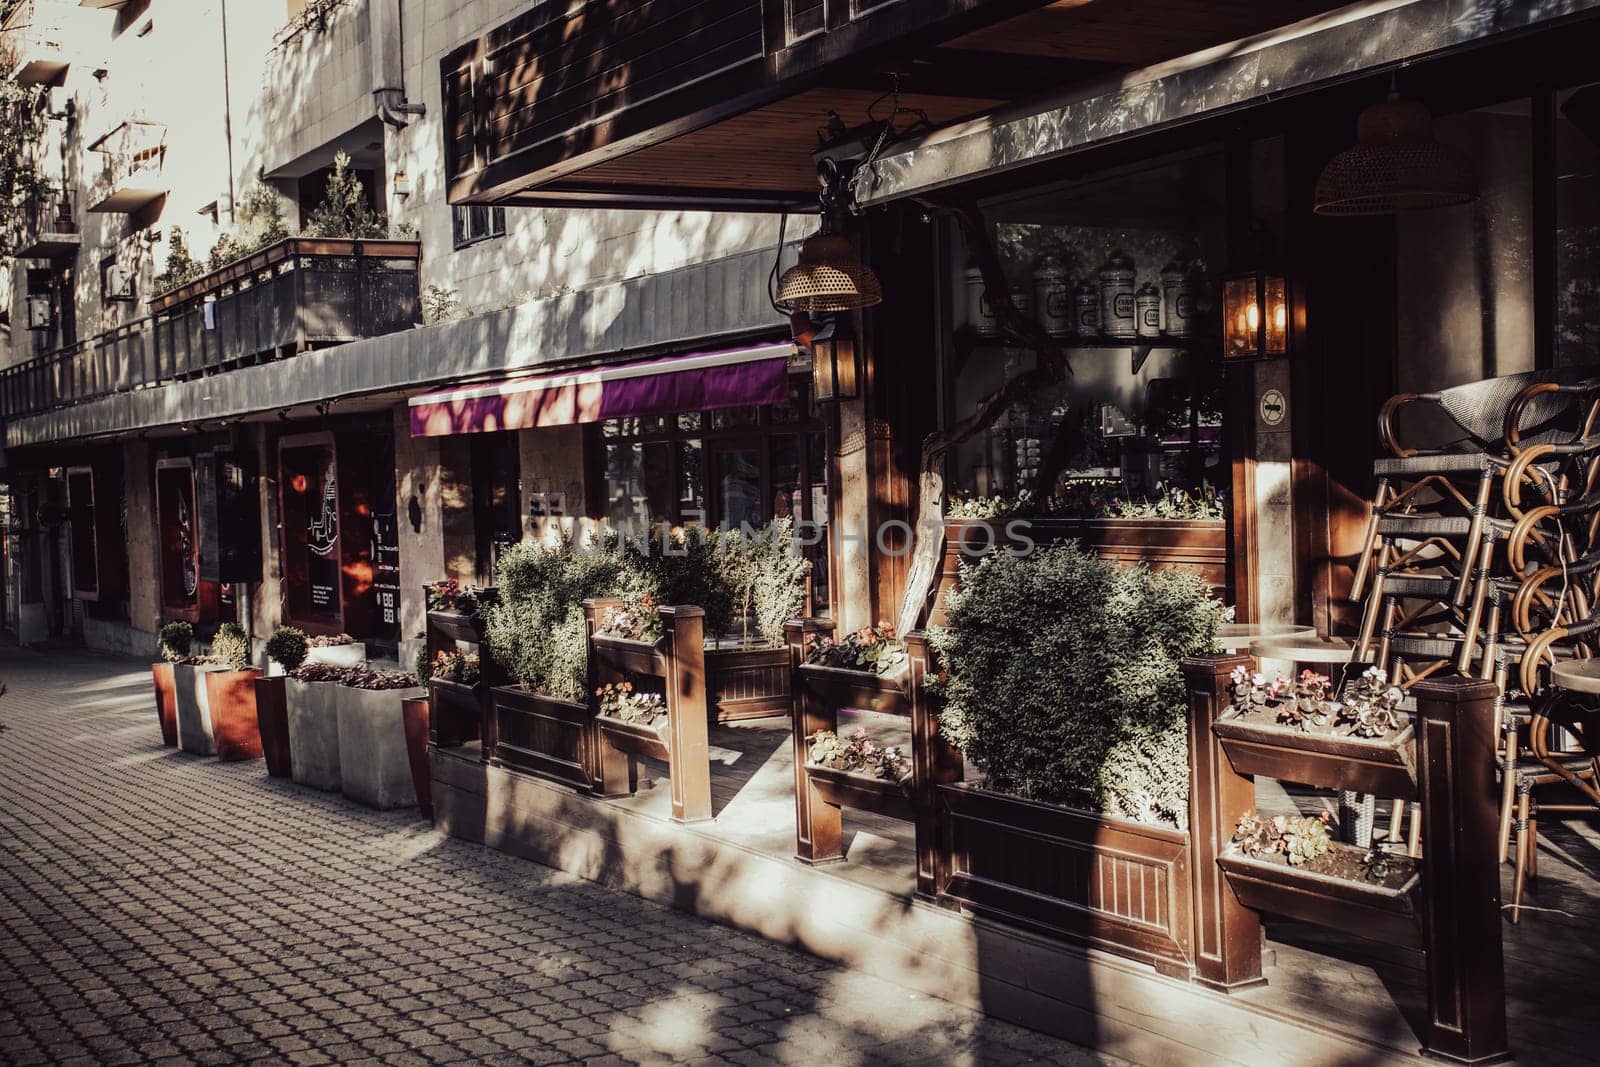 Street view with beautiful buildings and cafe terrace during the morning light concept photo. One of the streets of Yerevan. Magic country Armenia. District scene. High quality picture for magazine, article